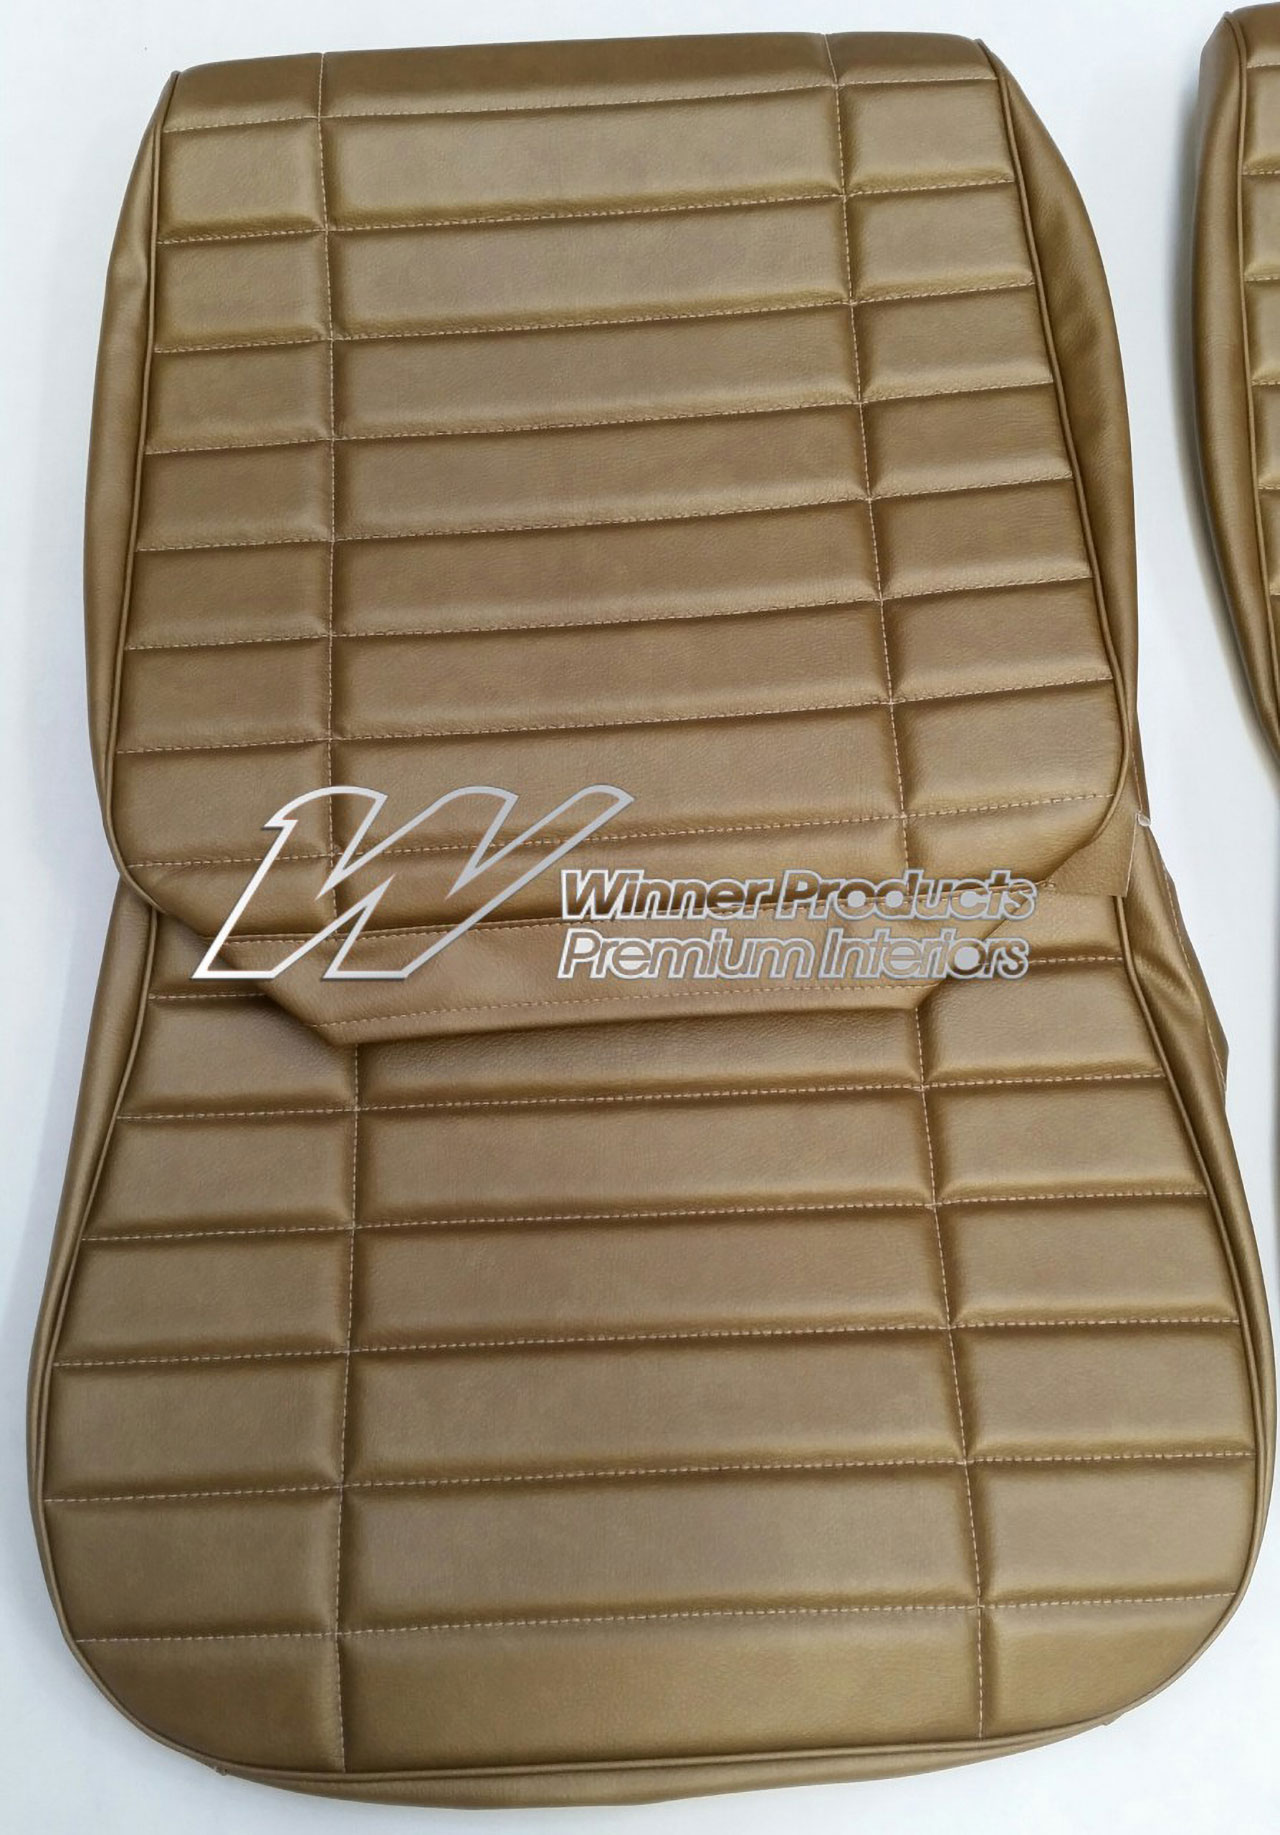 Holden Monaro HG Monaro Coupe 11X Antique Gold Seat Covers (Image 2 of 3)